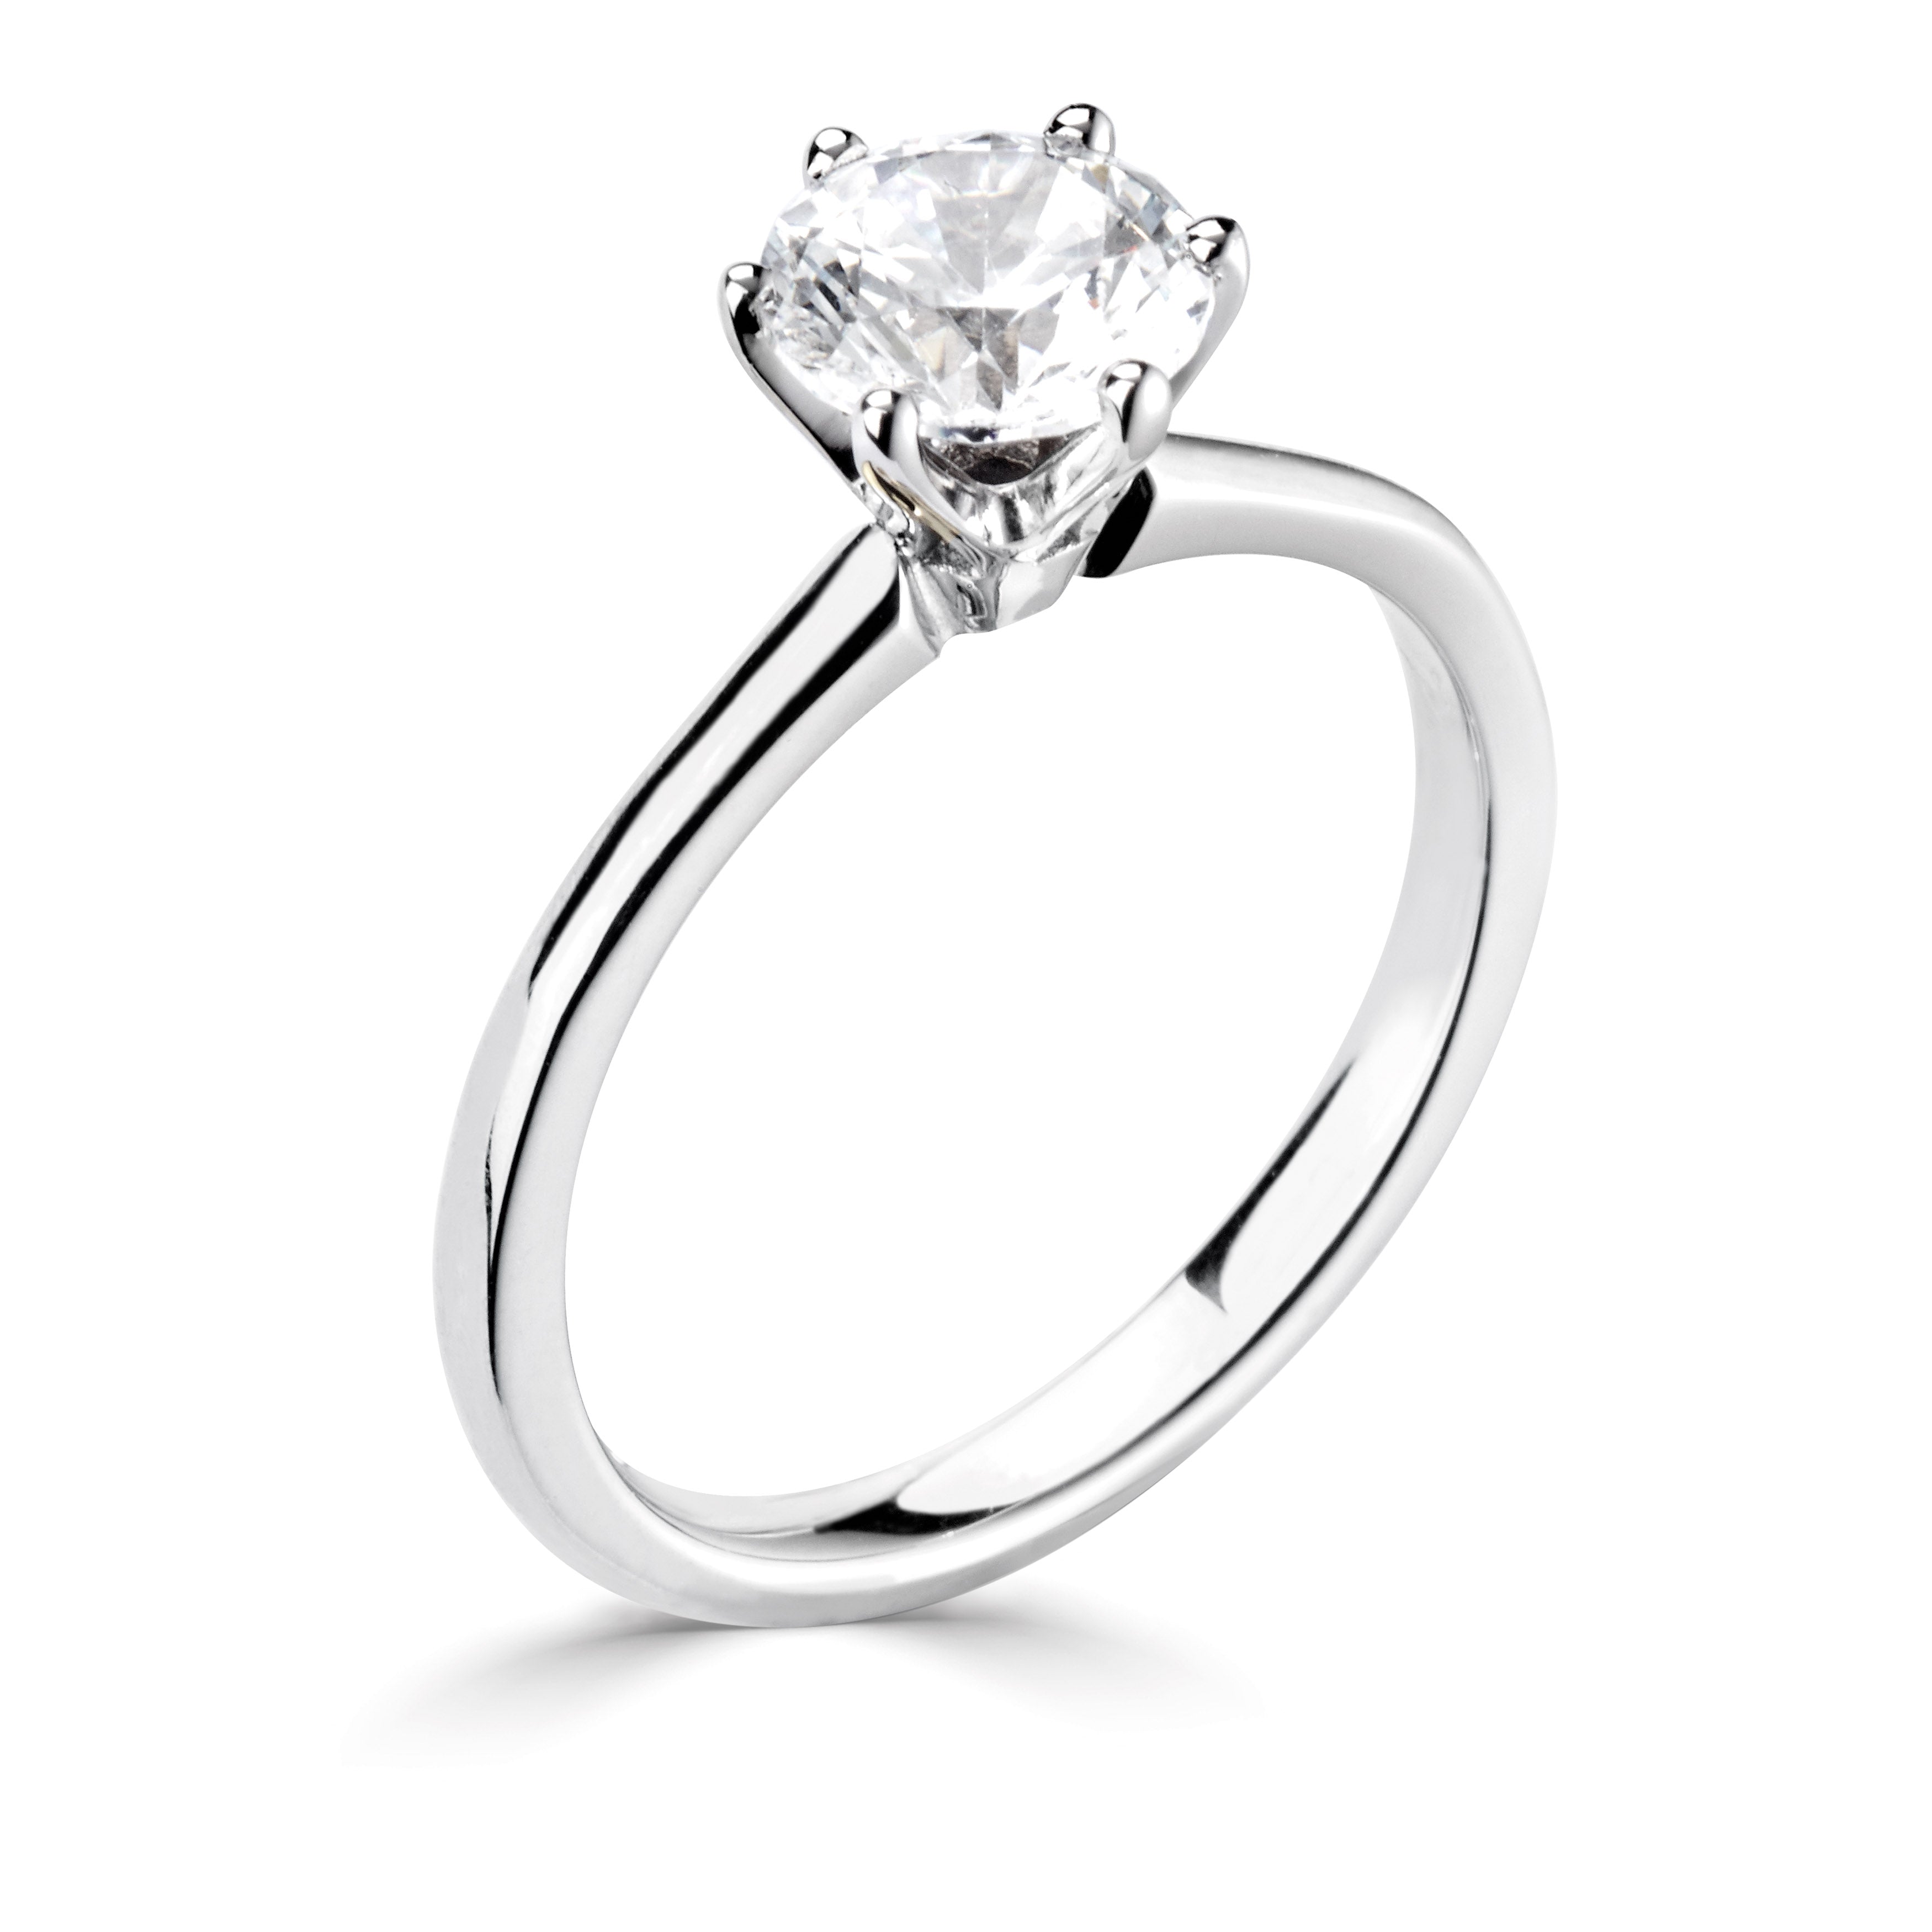 Makenna *Select a Round Diamond 0.25ct or above